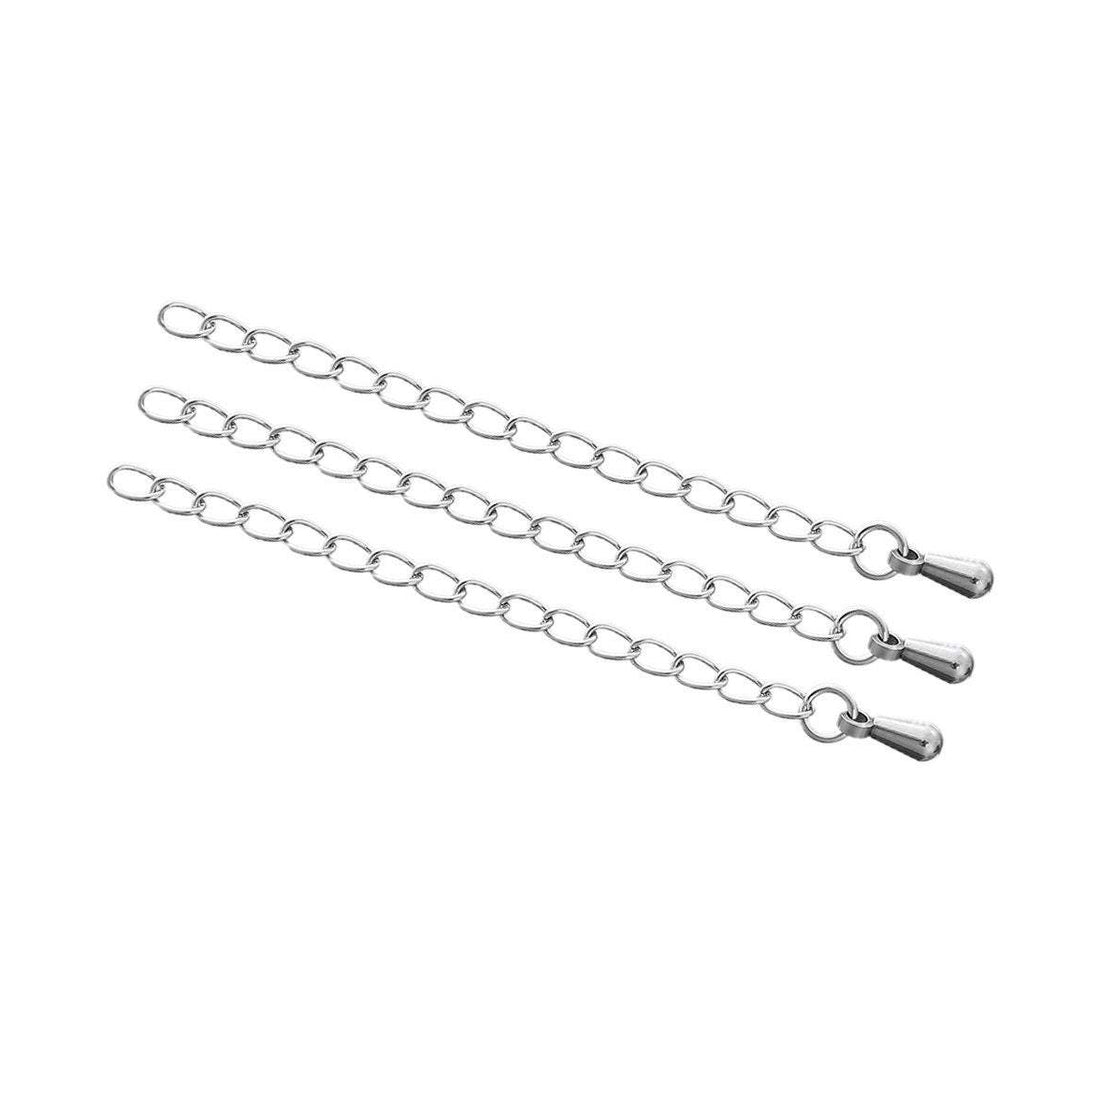 Stainless steel extension jewelry chains - Tail extender 60mm with charm